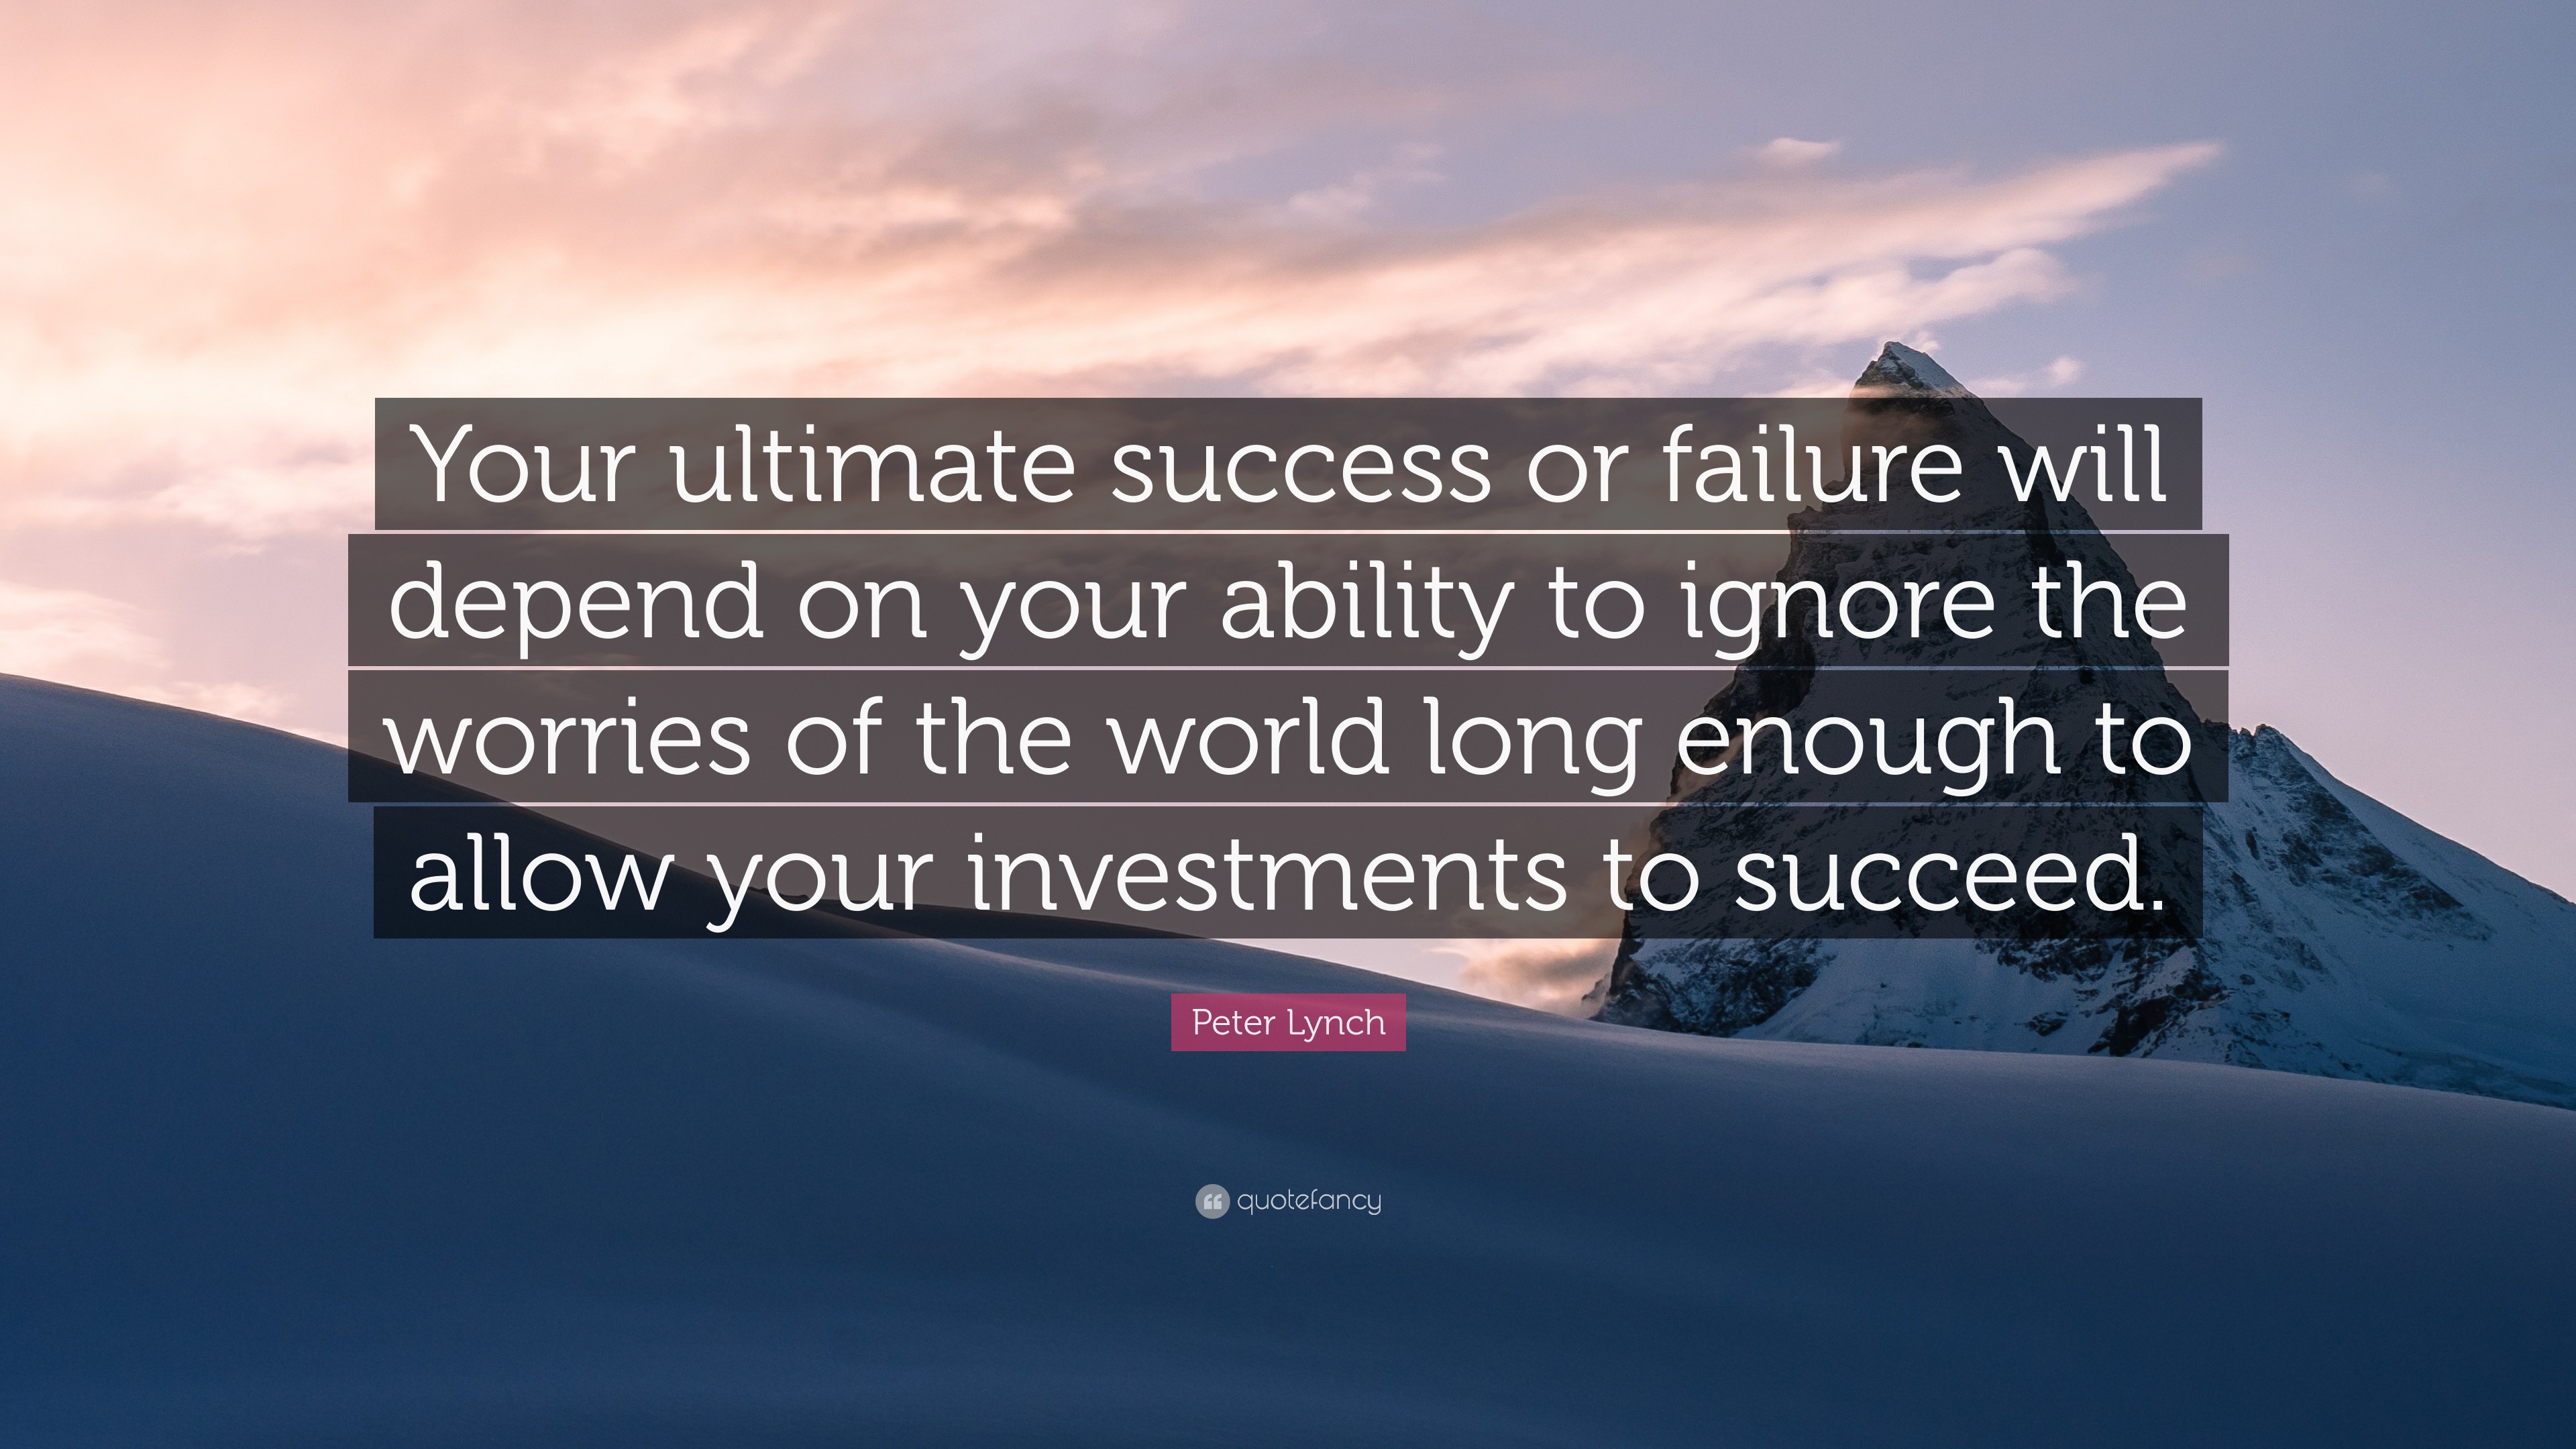 https://quotefancy.com/media/wallpaper/3840x2160/2419908-Peter-Lynch-Quote-Your-ultimate-success-or-failure-will-depend-on.jpg